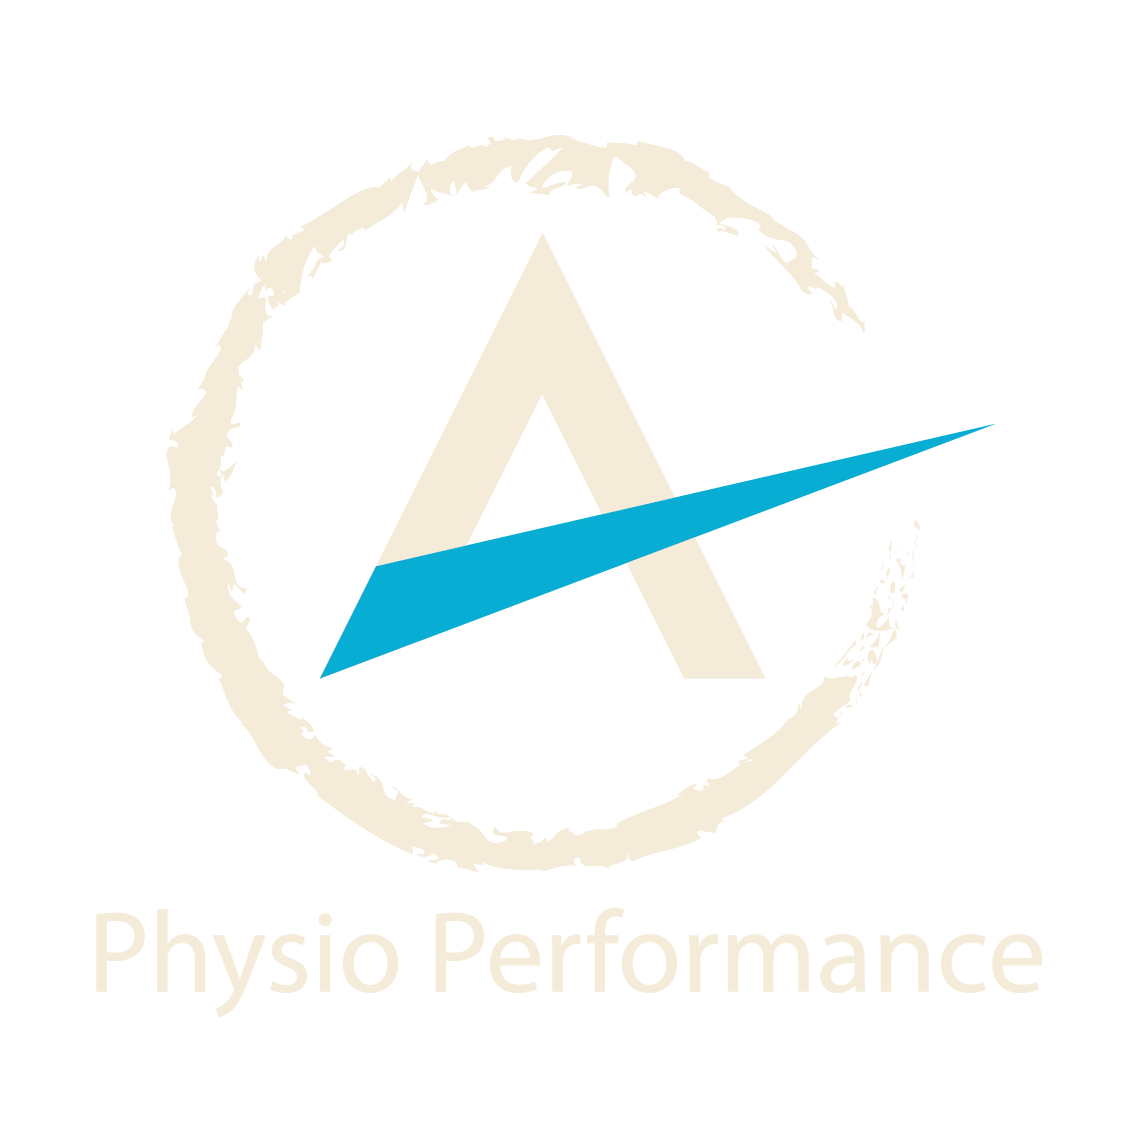 A Physio Performance